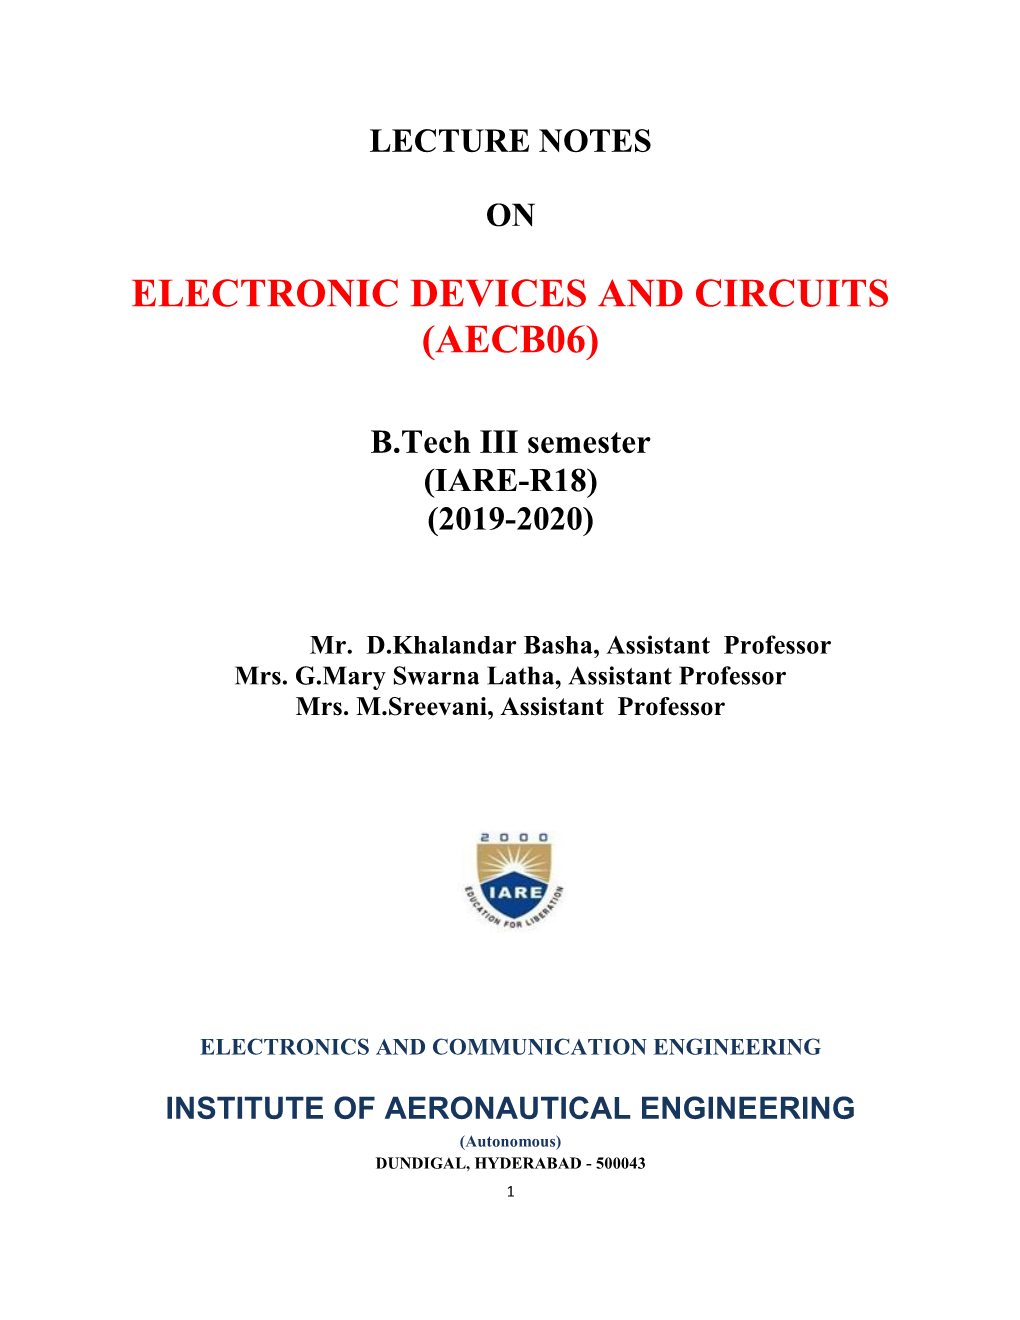 Electronic Devices and Circuits (Aecb06)